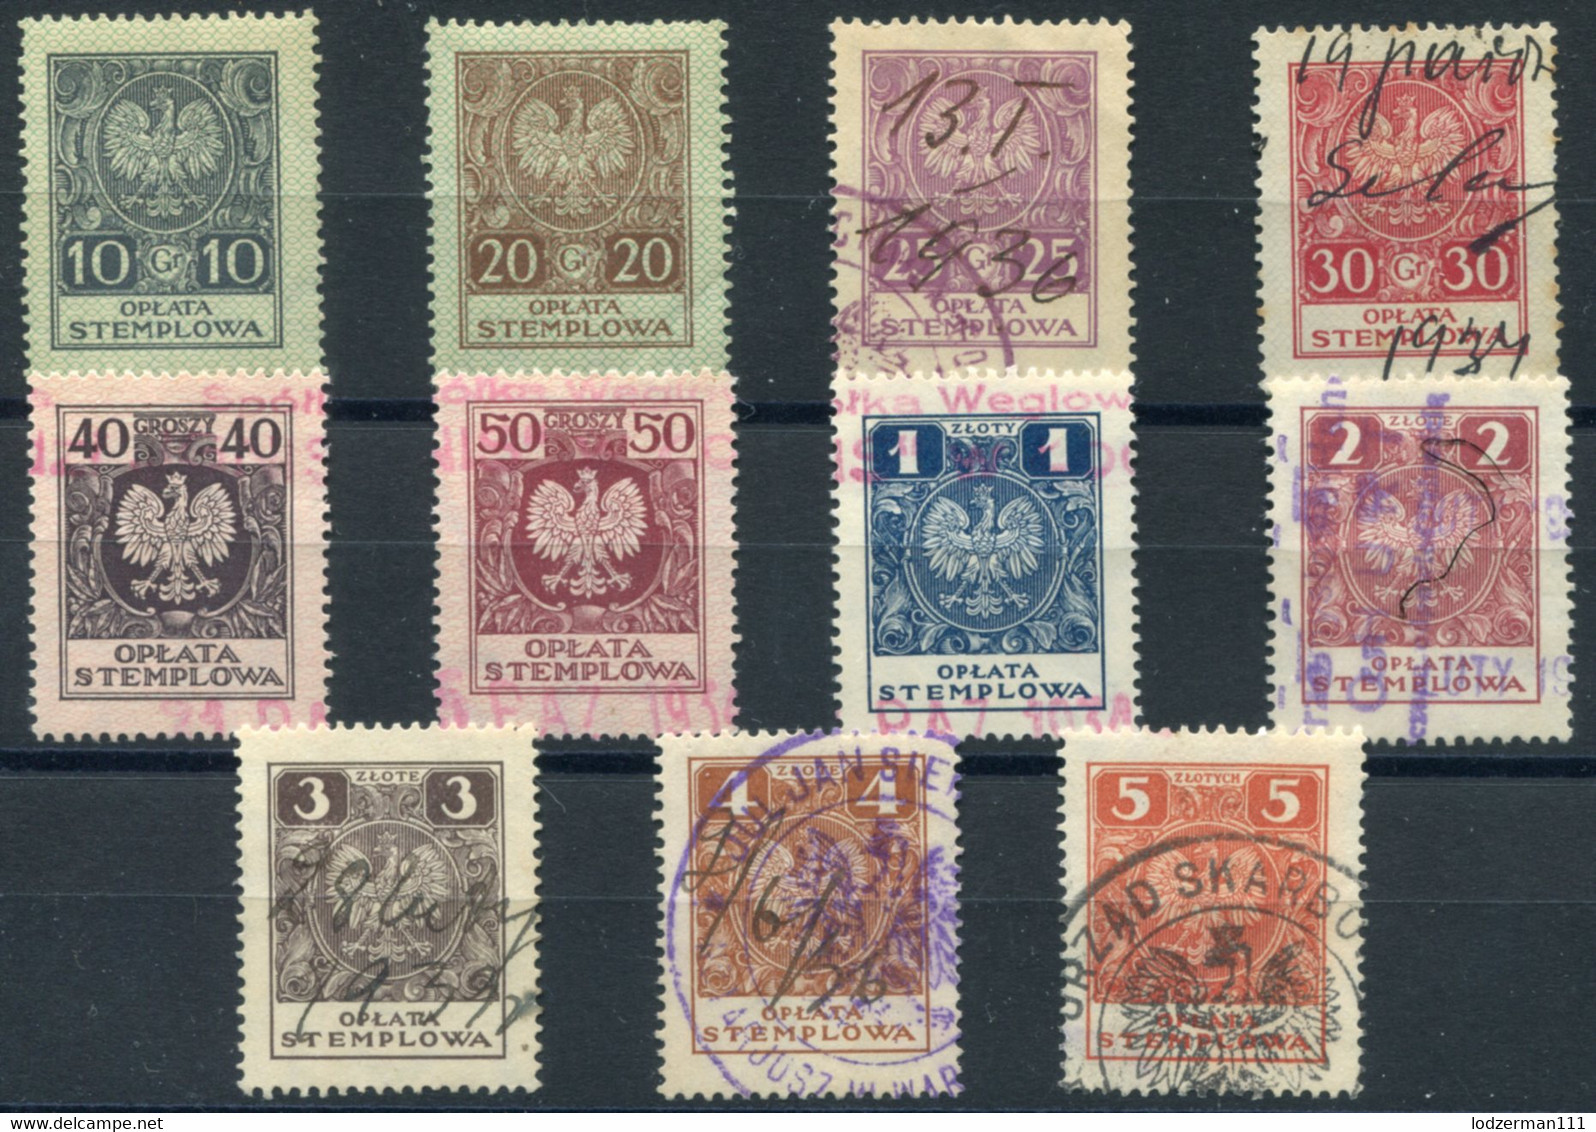 1932 General Zloty Issue #100-110 Compl. Set Used (2 MNH) All VF - Fiscale Zegels